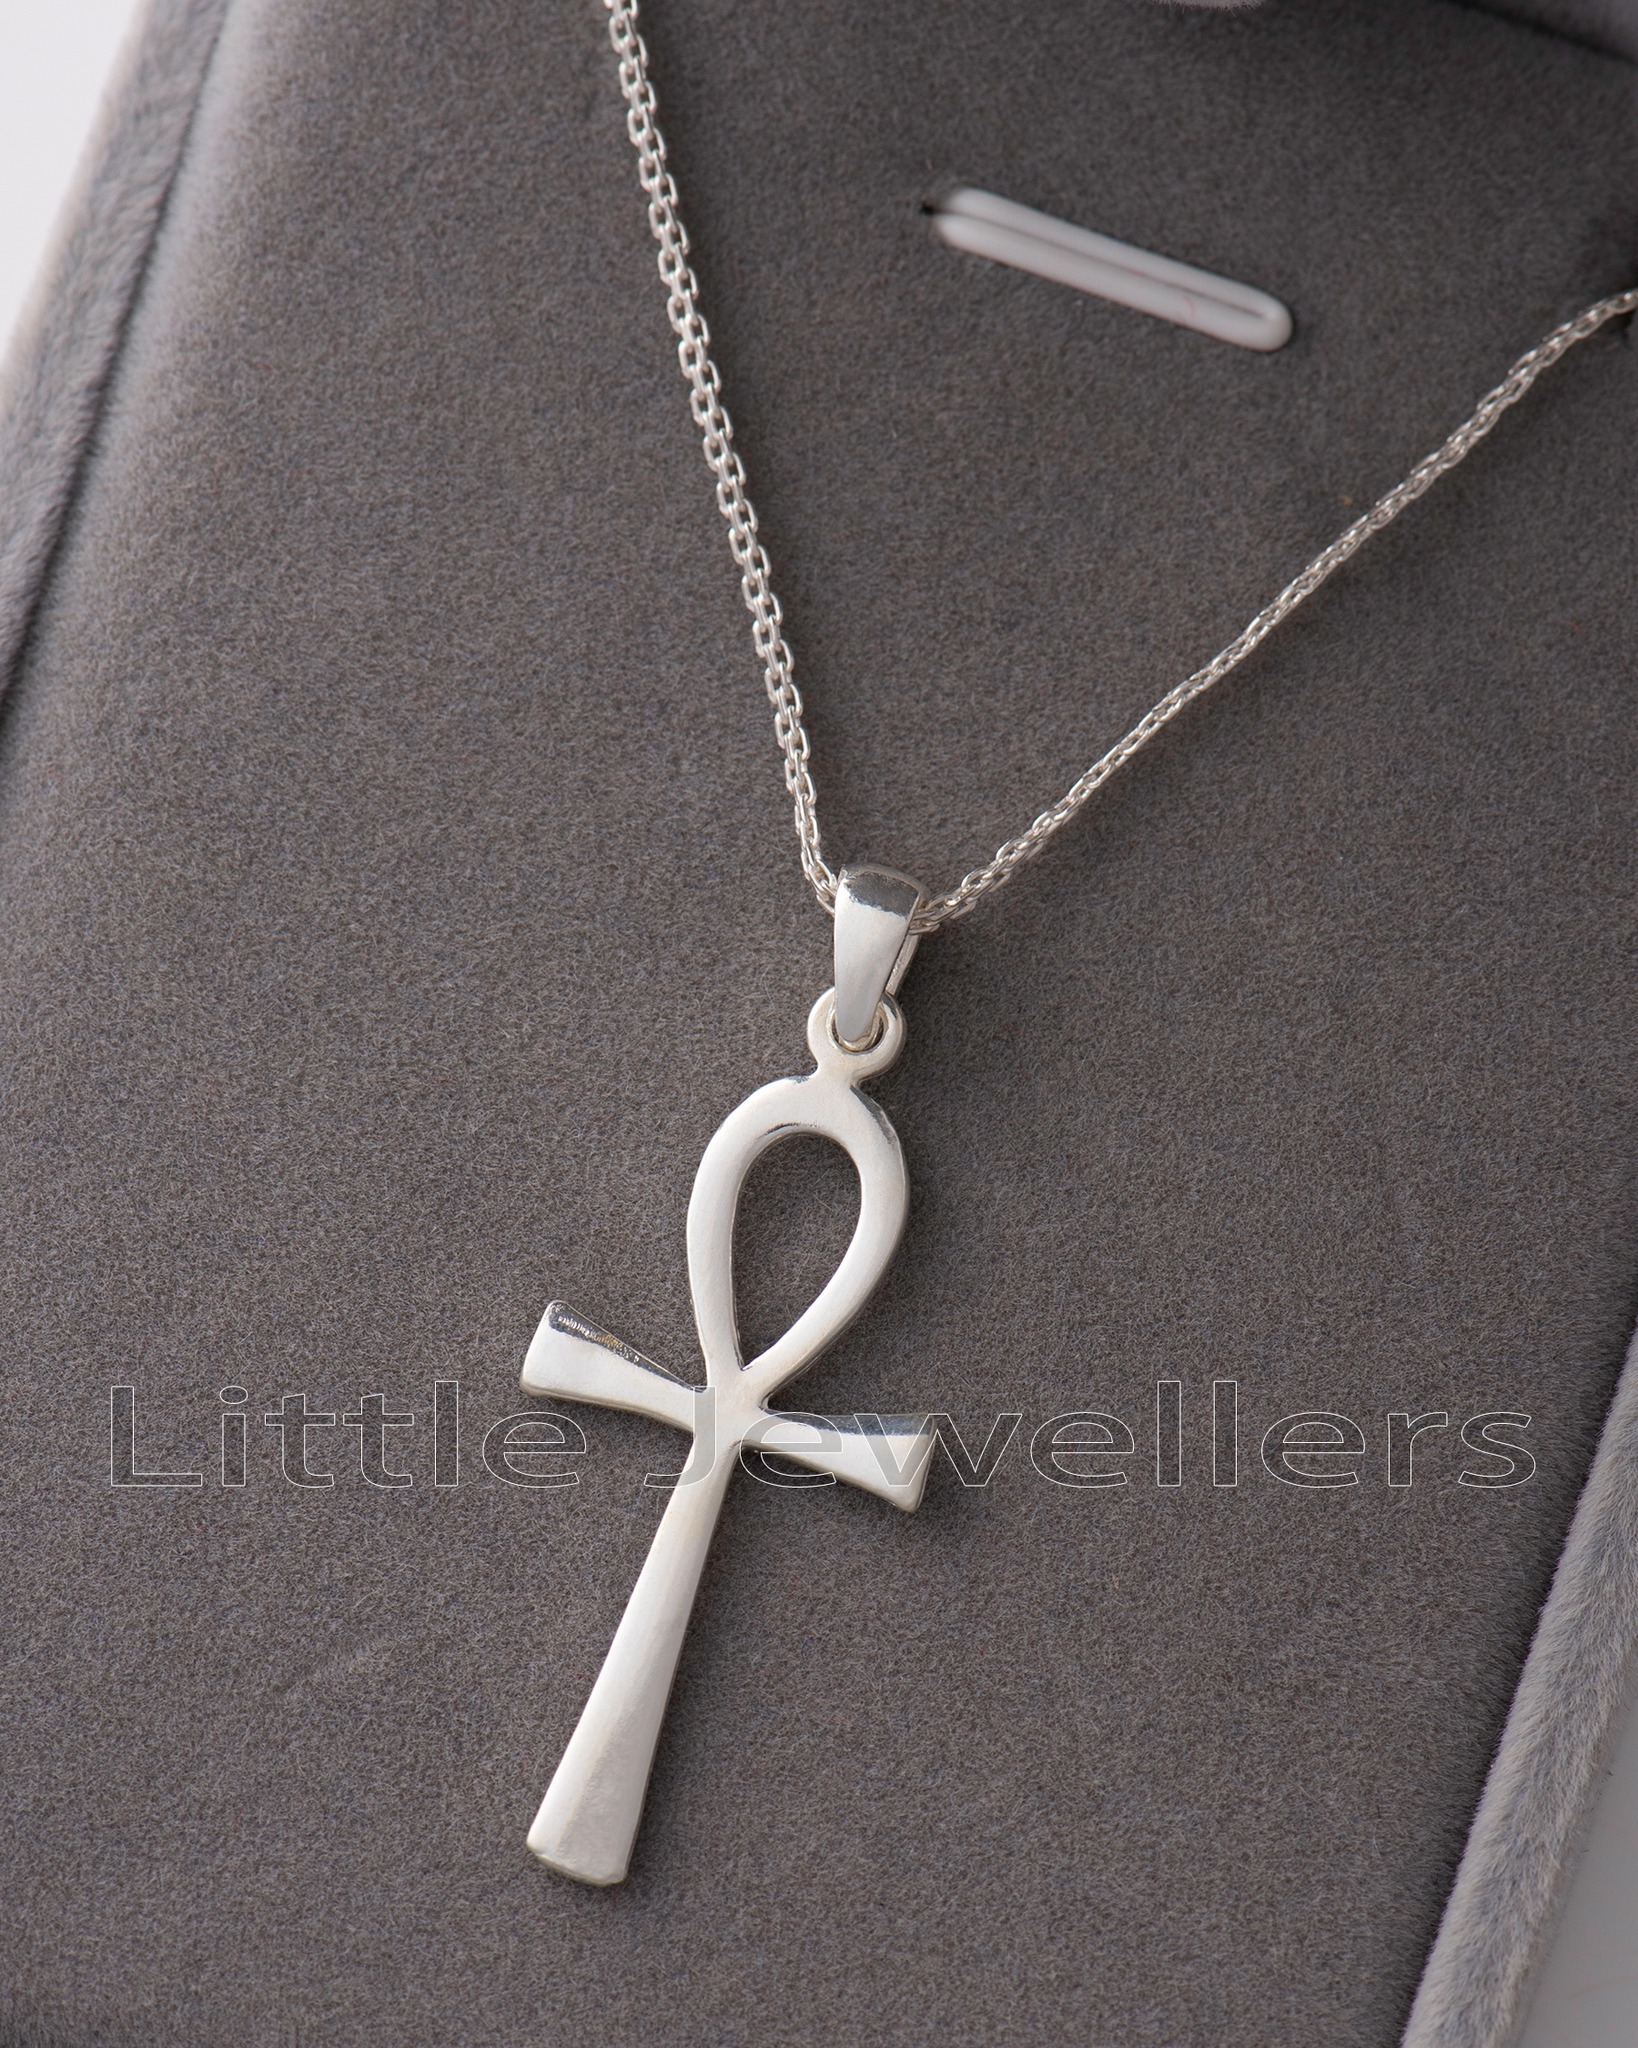 Shop our collection of religious jewellery, including the unisex ankh necklace made of sterling silver. Embrace life with this stylish and meaningful accessory.